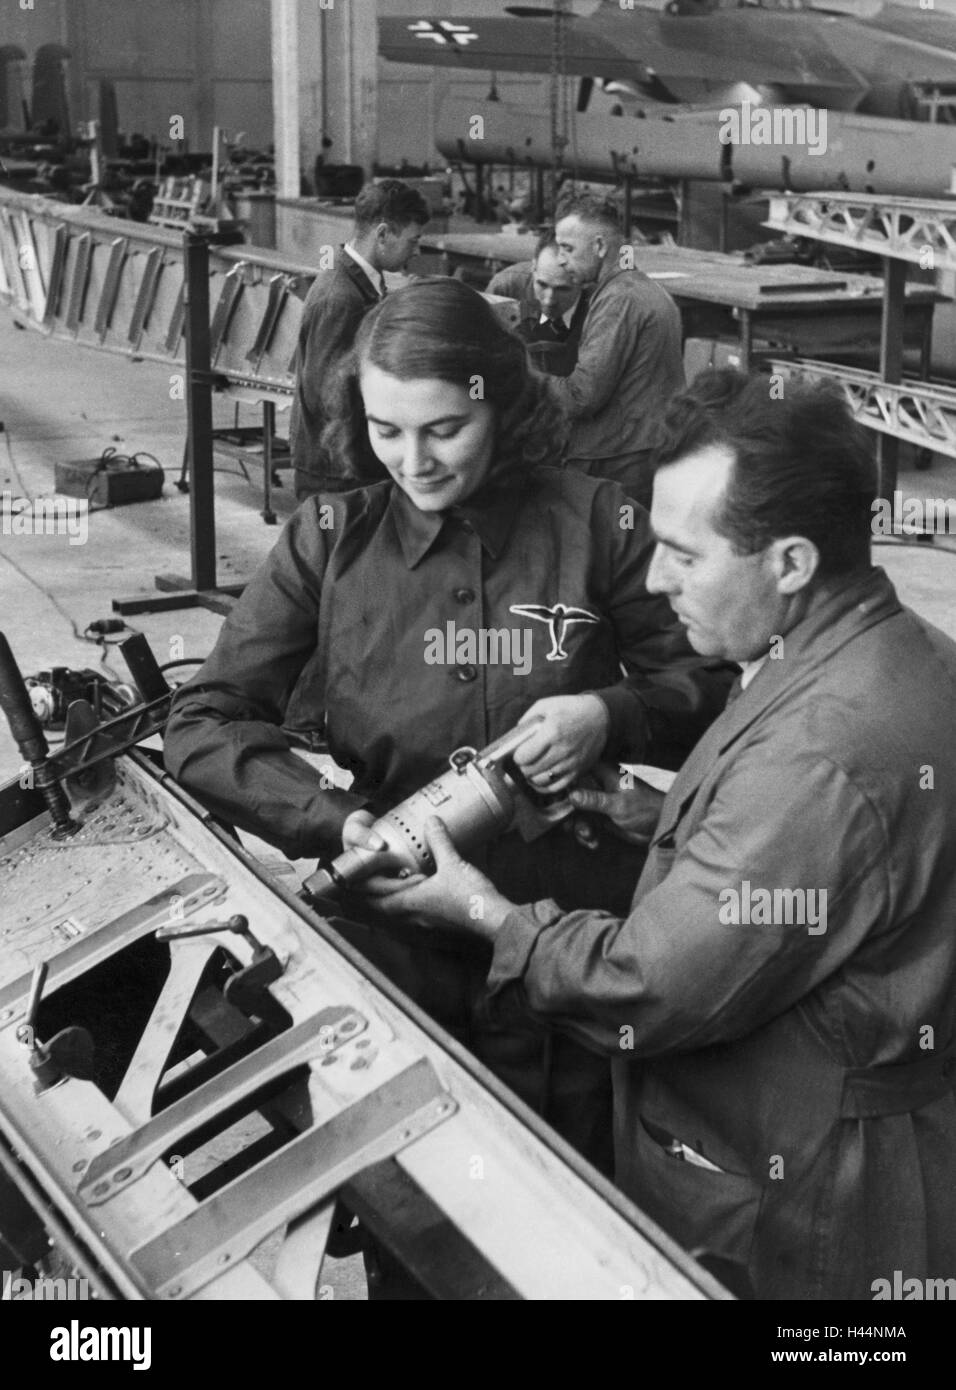 Germany, defense industry, Dornier, aircraft, training, 1942, economy, industry, factory, defense industry, occupation, defense, aerospace industry, military production, five, airplane factory, people, women, men, trainers, aircraft teach, Armor assistant, instruct, screwing, drilling, support, work, workbench, Dornier-Werke, nostalgia, historical, production facility, inside, Stock Photo